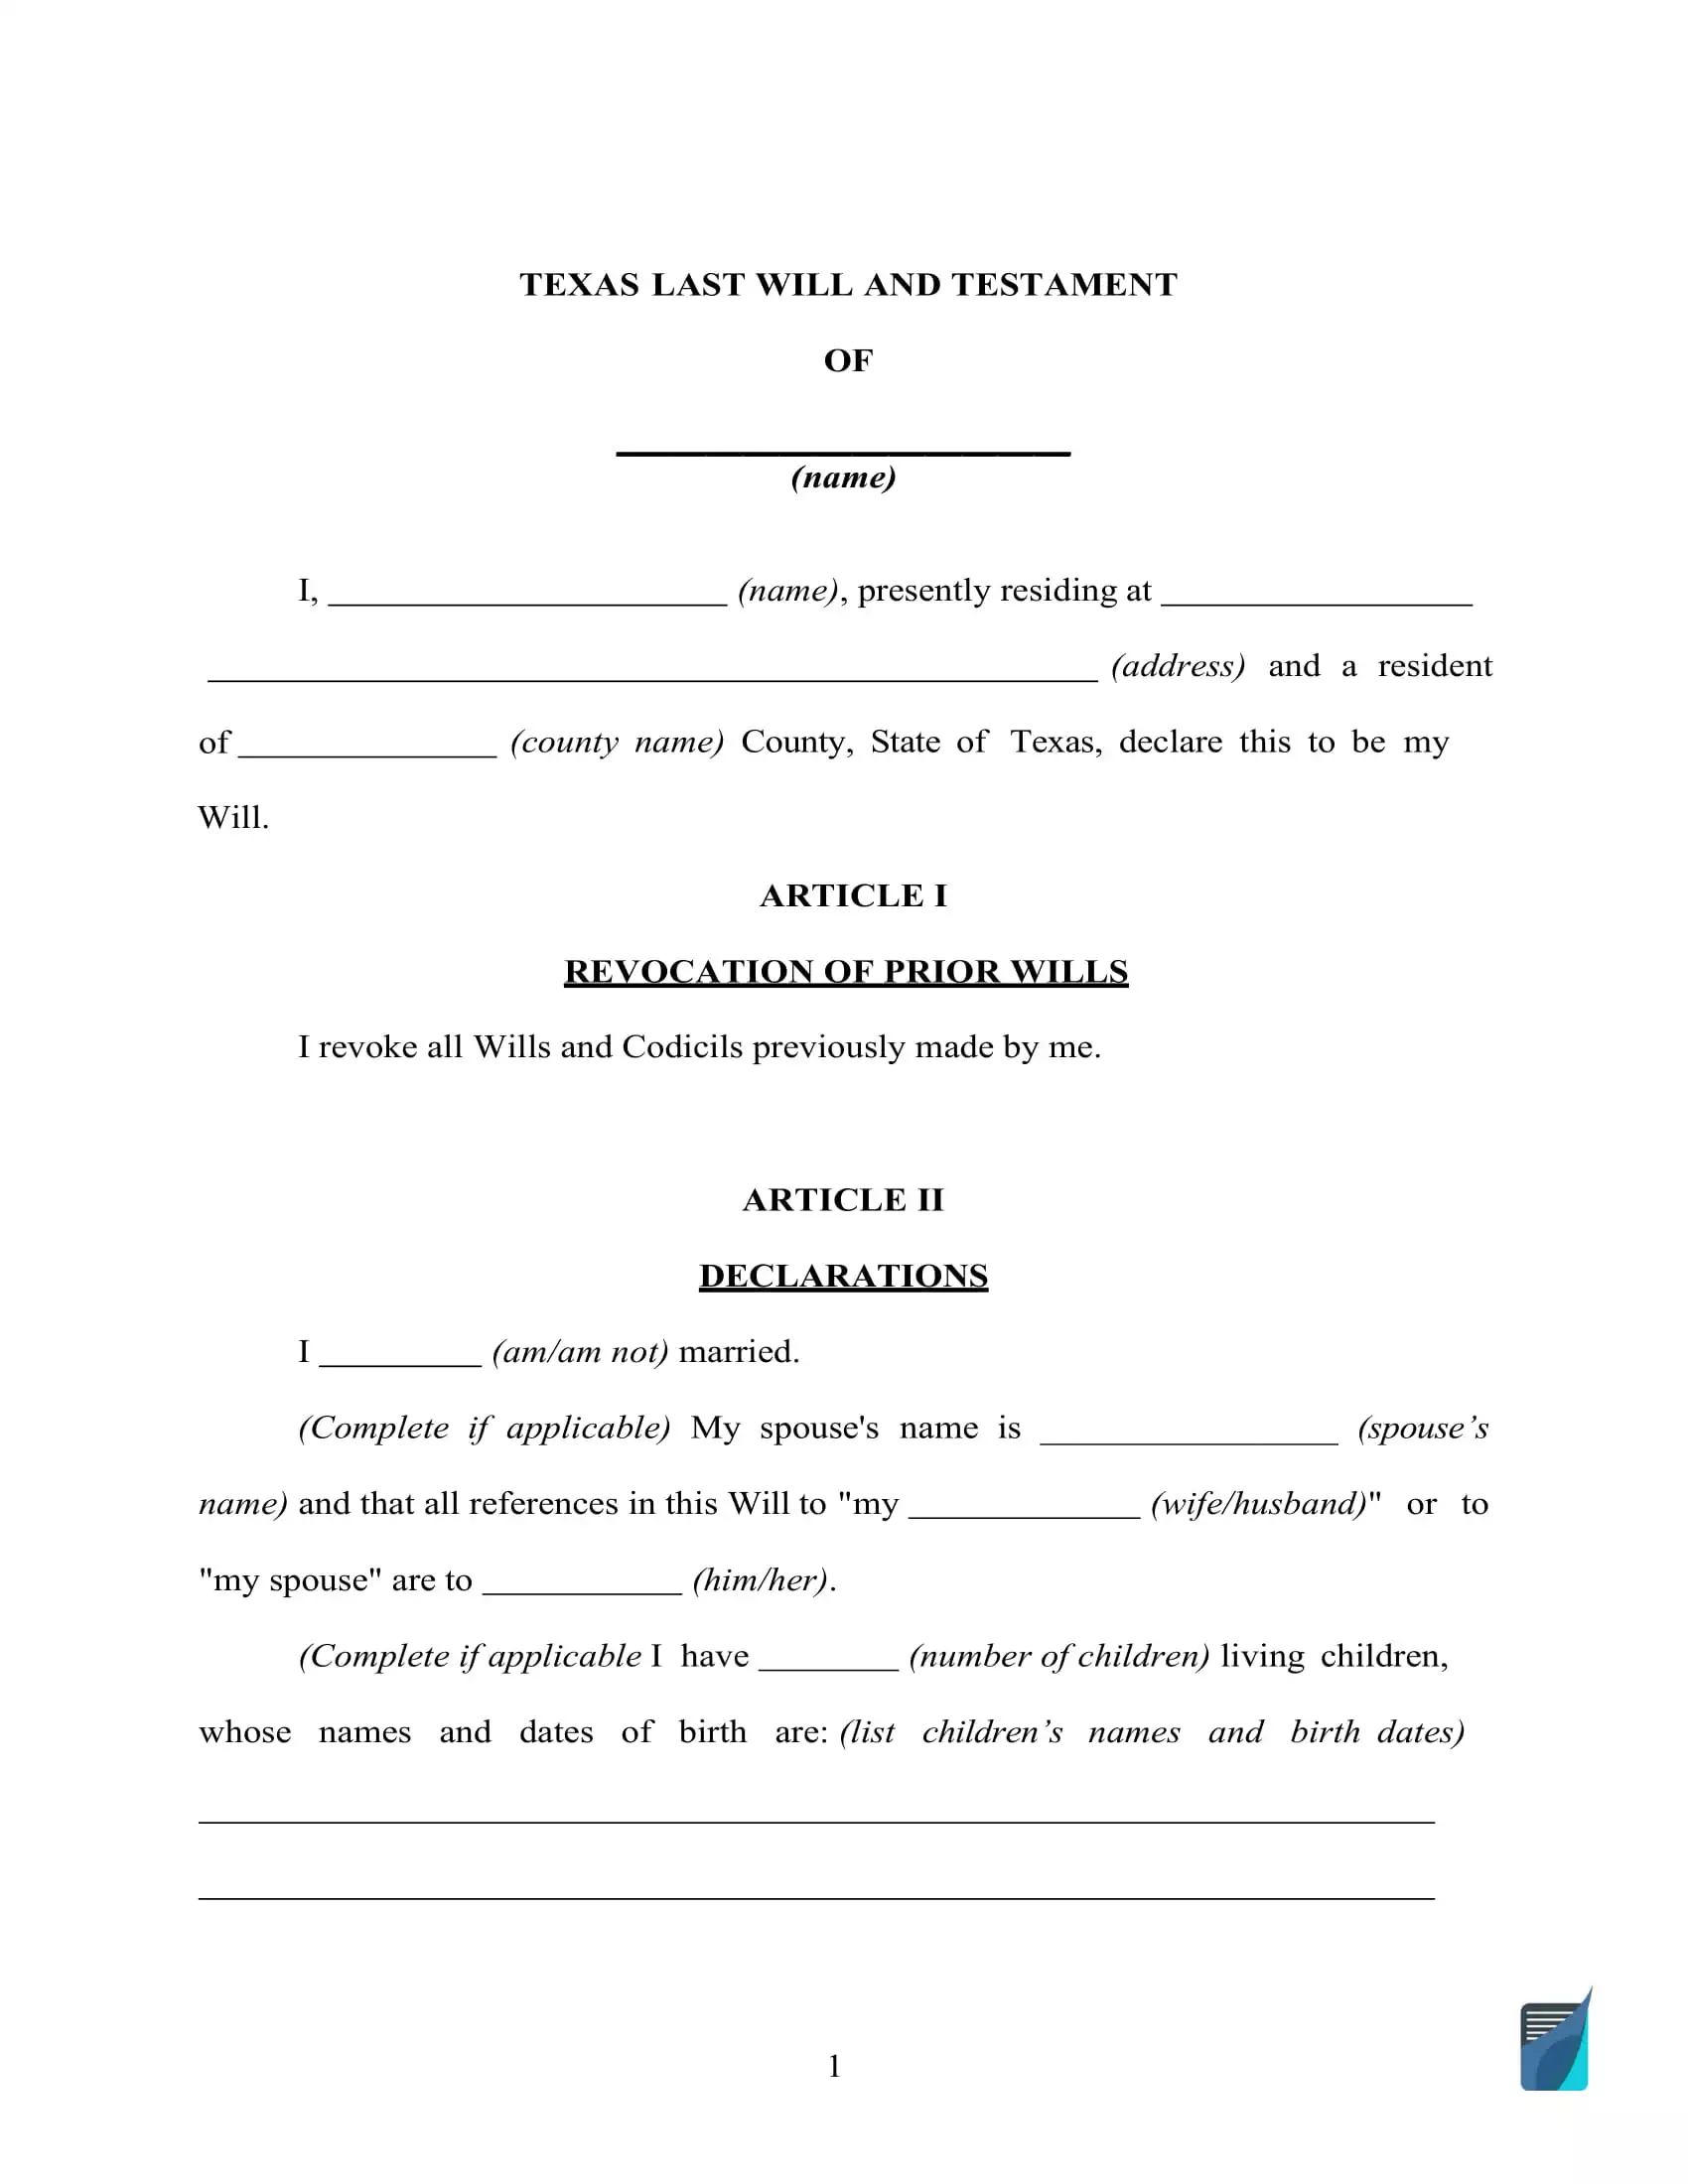 Fillable Texas Last Will and Testament Form [FREE]  FormsPal